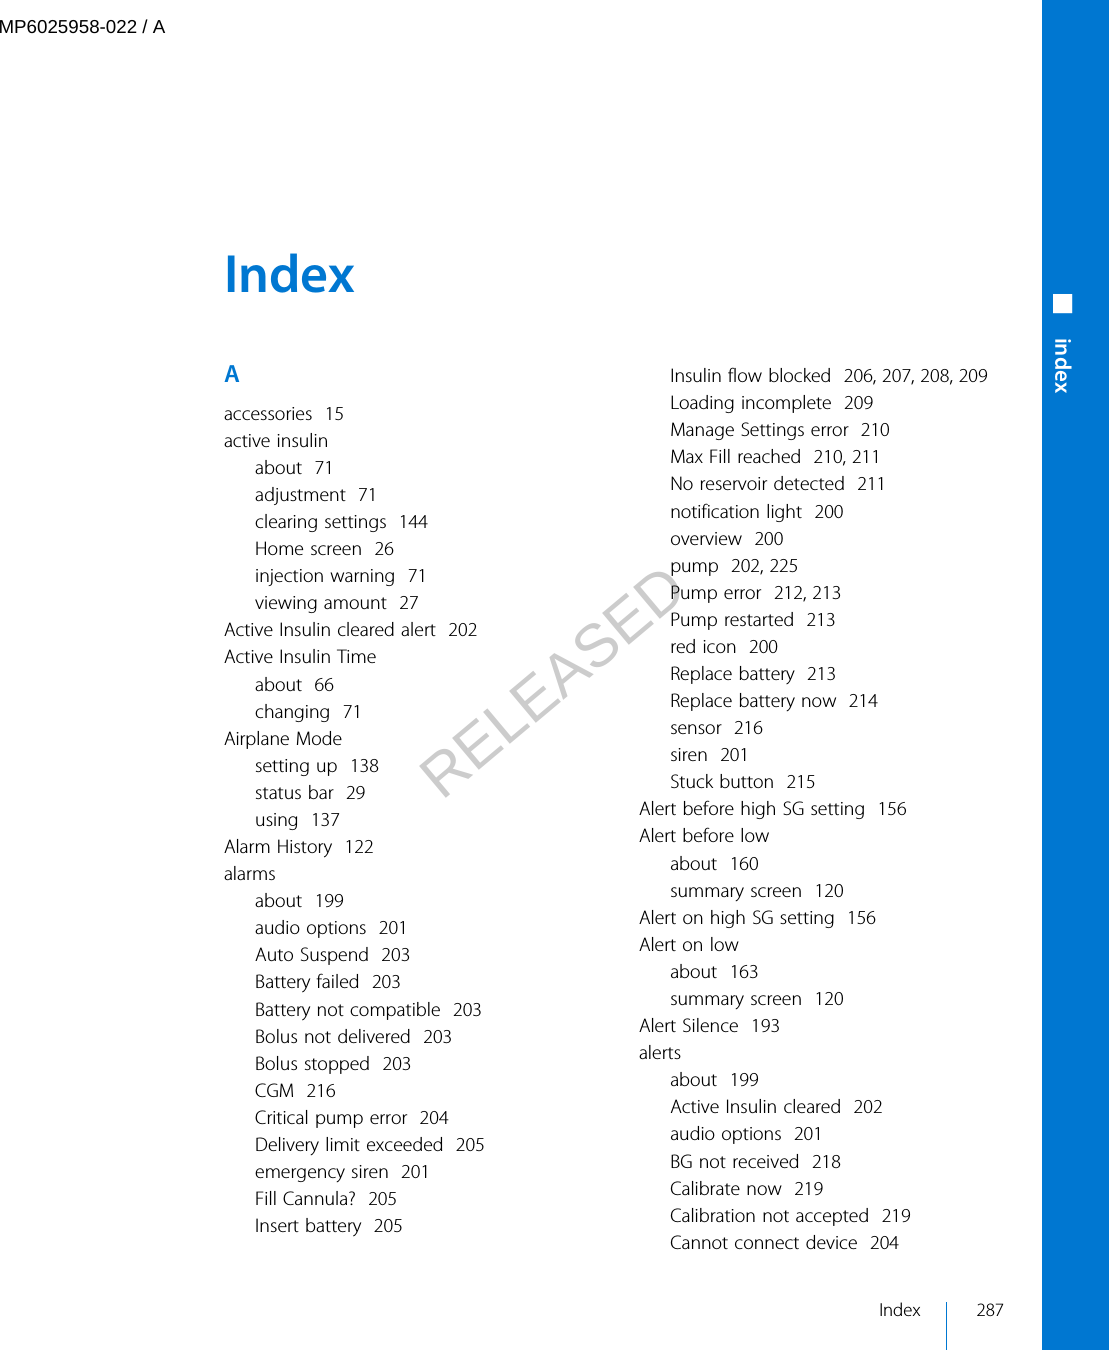  Index Aaccessories  15active insulinabout  71adjustment  71clearing settings  144Home screen  26injection warning  71viewing amount  27Active Insulin cleared alert  202Active Insulin Timeabout  66changing  71Airplane Modesetting up  138status bar  29using  137Alarm History  122alarmsabout  199audio options  201Auto Suspend  203Battery failed  203Battery not compatible  203Bolus not delivered  203Bolus stopped  203CGM  216Critical pump error  204Delivery limit exceeded  205emergency siren  201Fill Cannula?  205Insert battery  205Insulin flow blocked  206, 207, 208, 209Loading incomplete  209Manage Settings error  210Max Fill reached  210, 211No reservoir detected  211notification light  200overview  200pump  202, 225Pump error  212, 213Pump restarted  213red icon  200Replace battery  213Replace battery now  214sensor  216siren  201Stuck button  215Alert before high SG setting  156Alert before lowabout  160summary screen  120Alert on high SG setting  156Alert on lowabout  163summary screen  120Alert Silence  193alertsabout  199Active Insulin cleared  202audio options  201BG not received  218Calibrate now  219Calibration not accepted  219Cannot connect device  204Index 287■ indexMP6025958-022 / ARELEASED